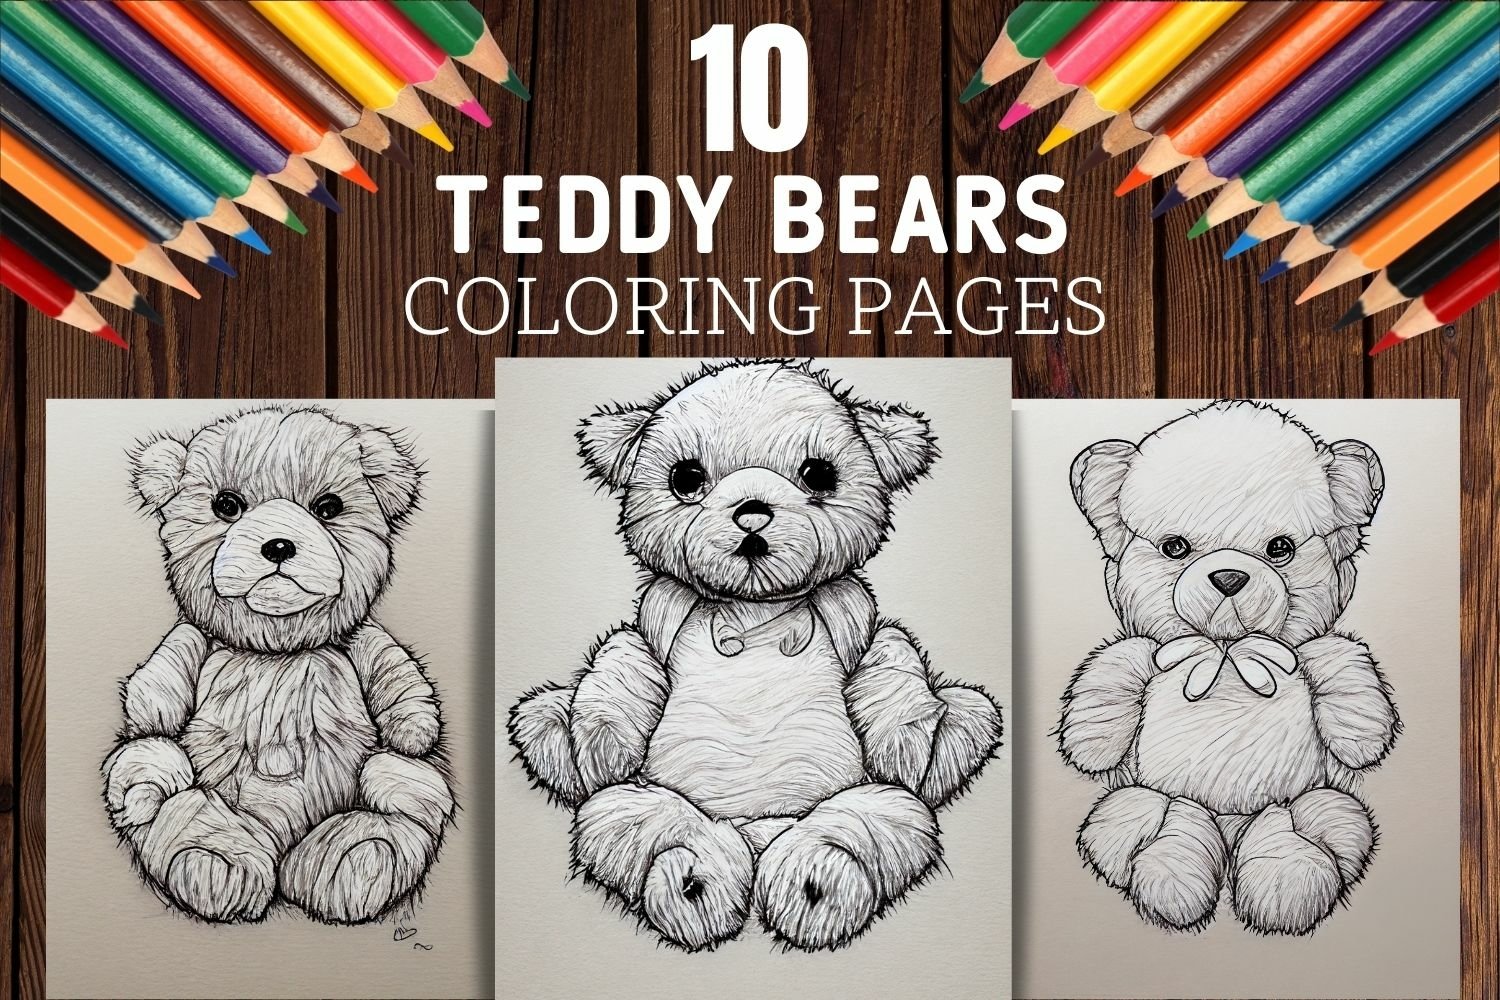 Teddy bears coloring pages